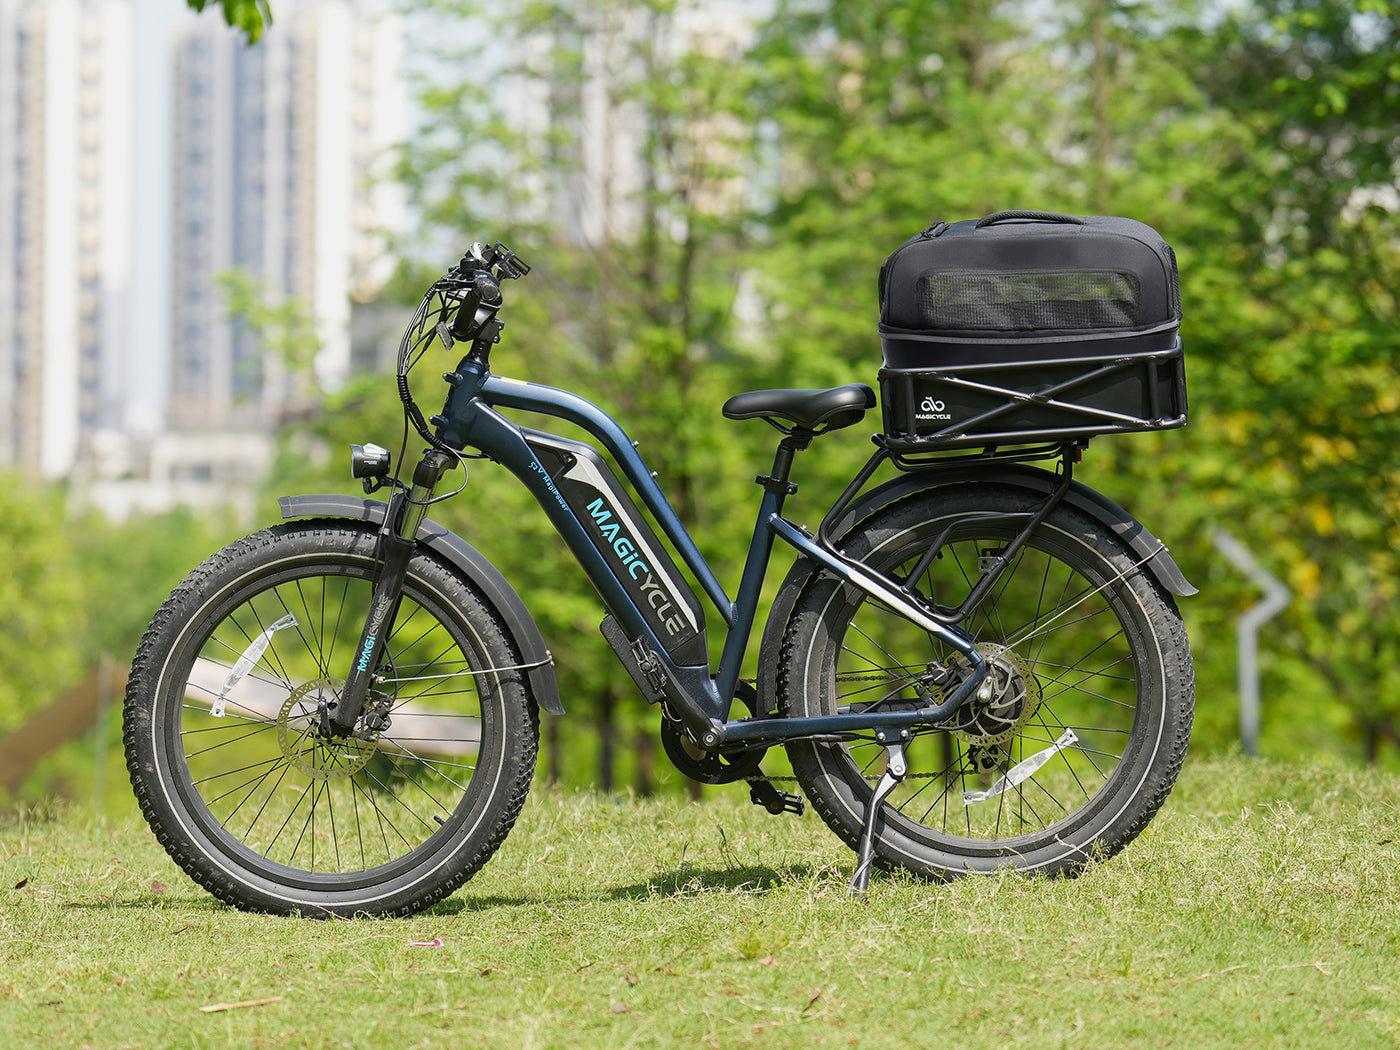 Magicycle Ebike Large Rear Rack Basket Perfect Cargo Basket for Electric Bike